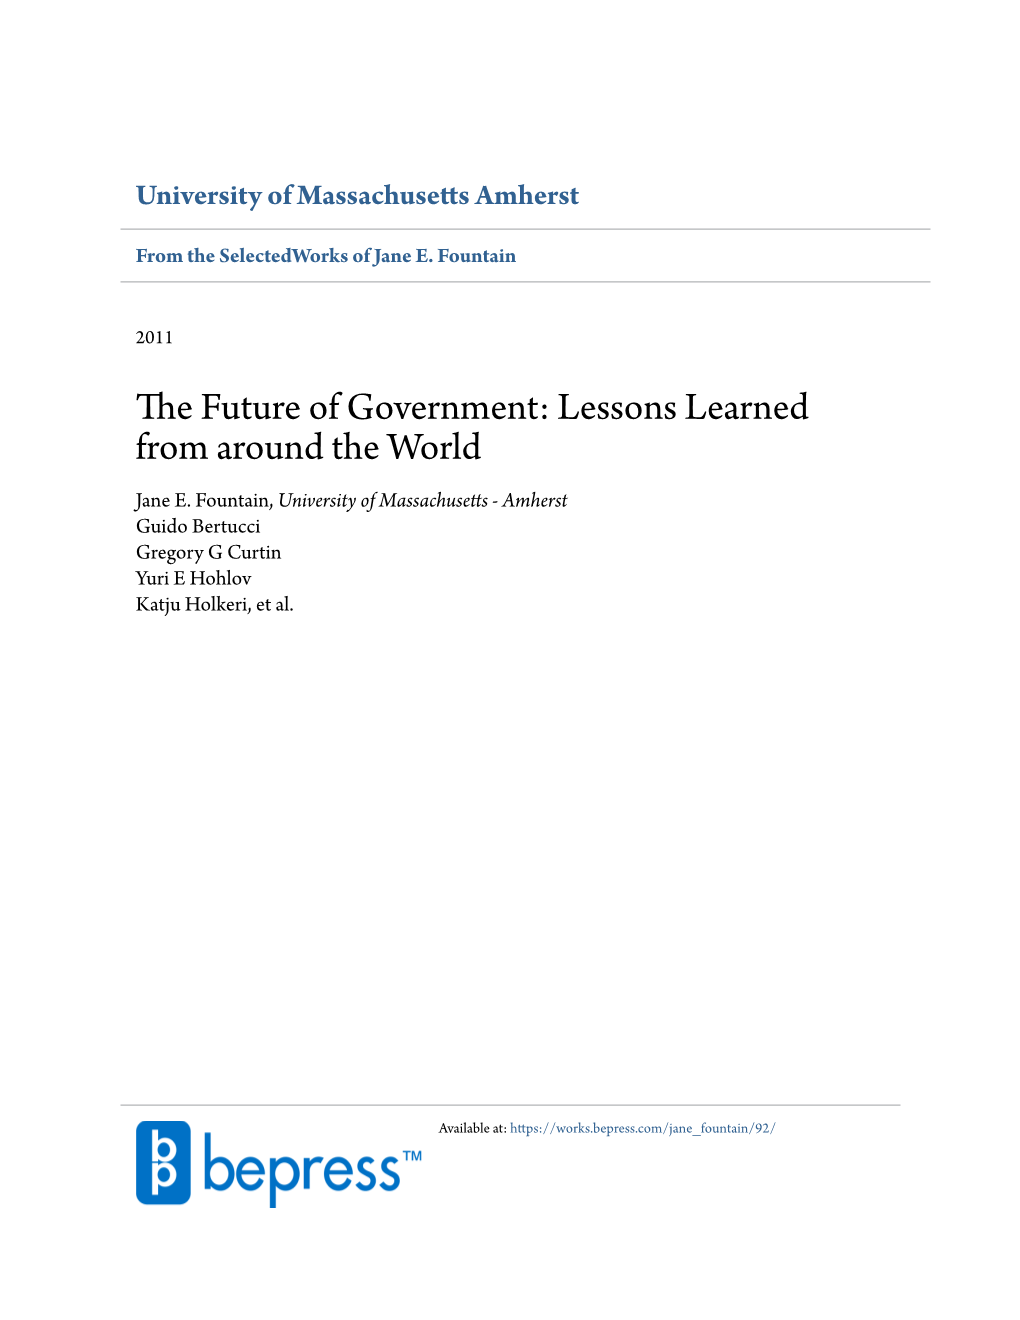 The Future of Government: Lessons Learned from Around the World, a Report Elaborated by the World Economic Forum’S Global Agenda Council on the Future of Government